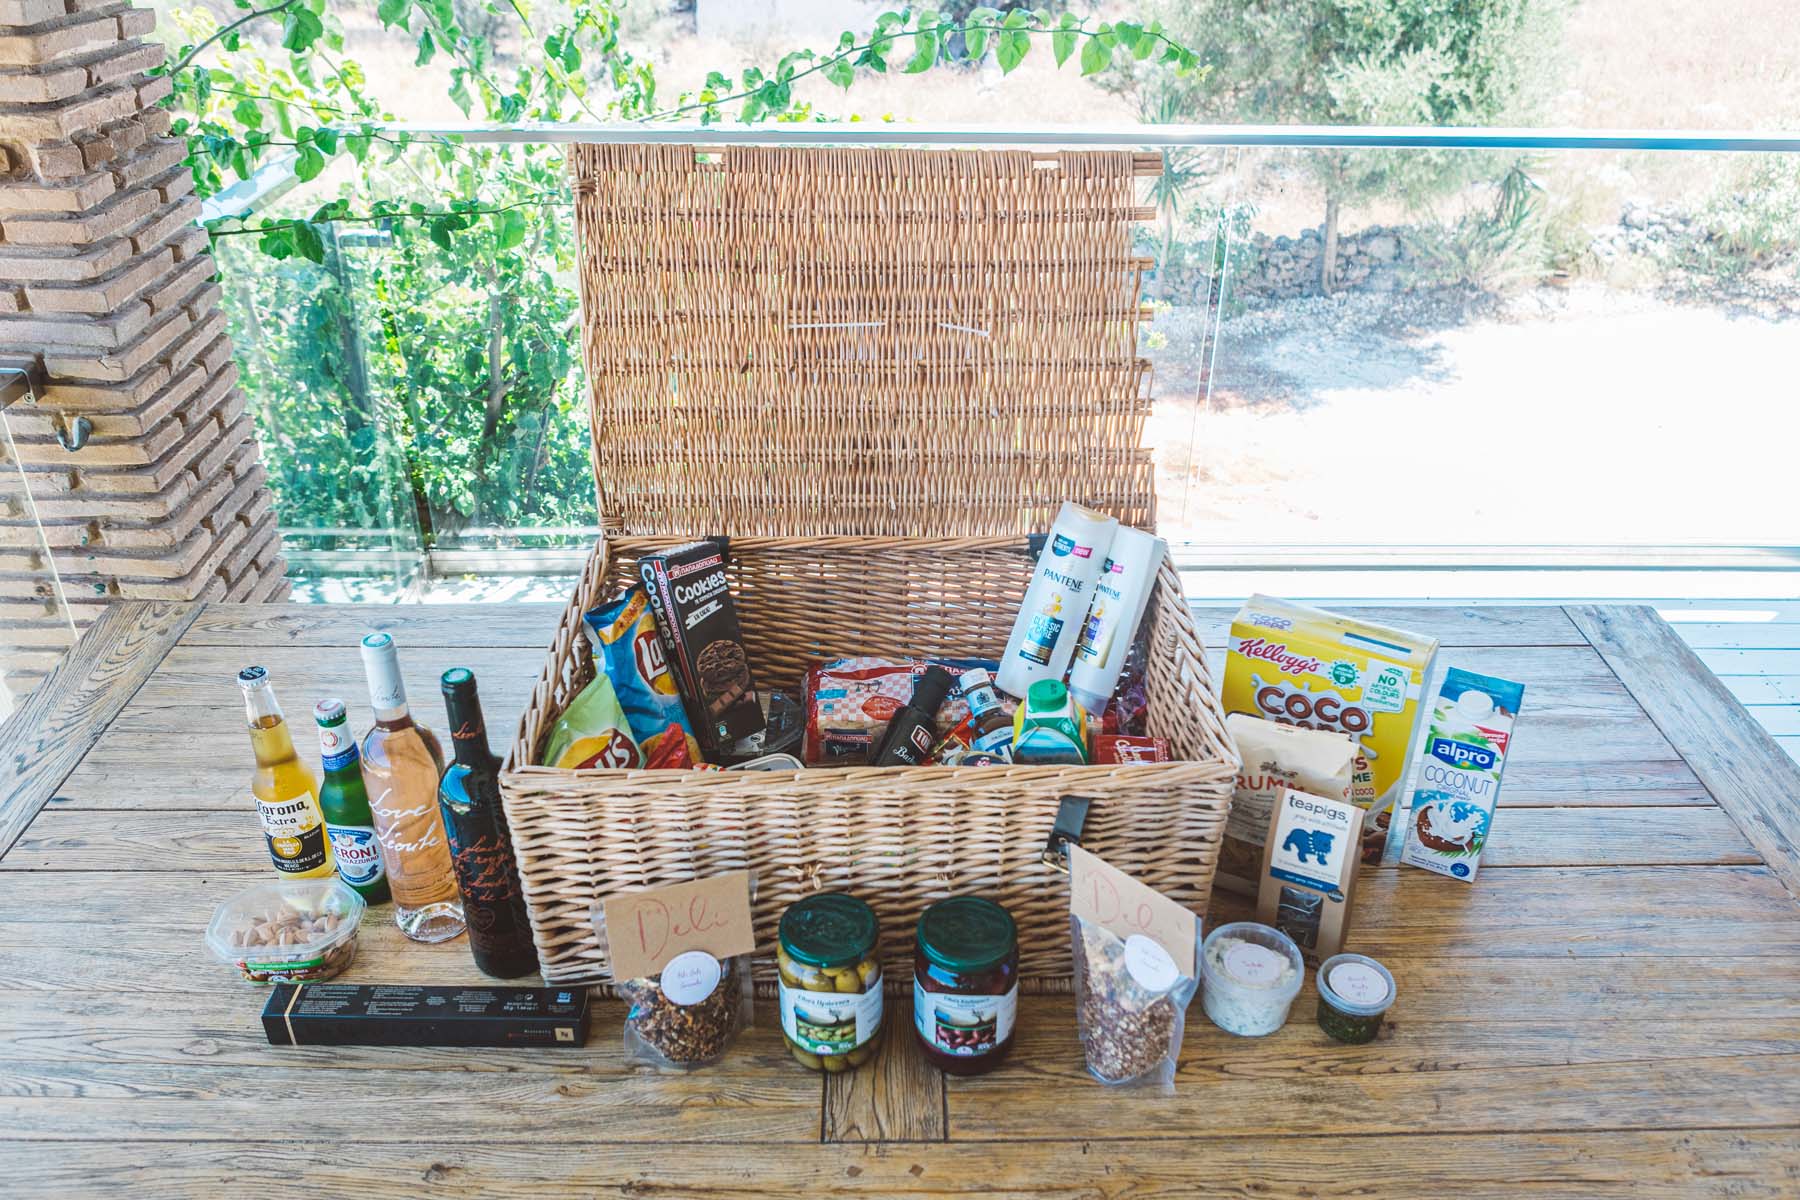 A hamper with groceries